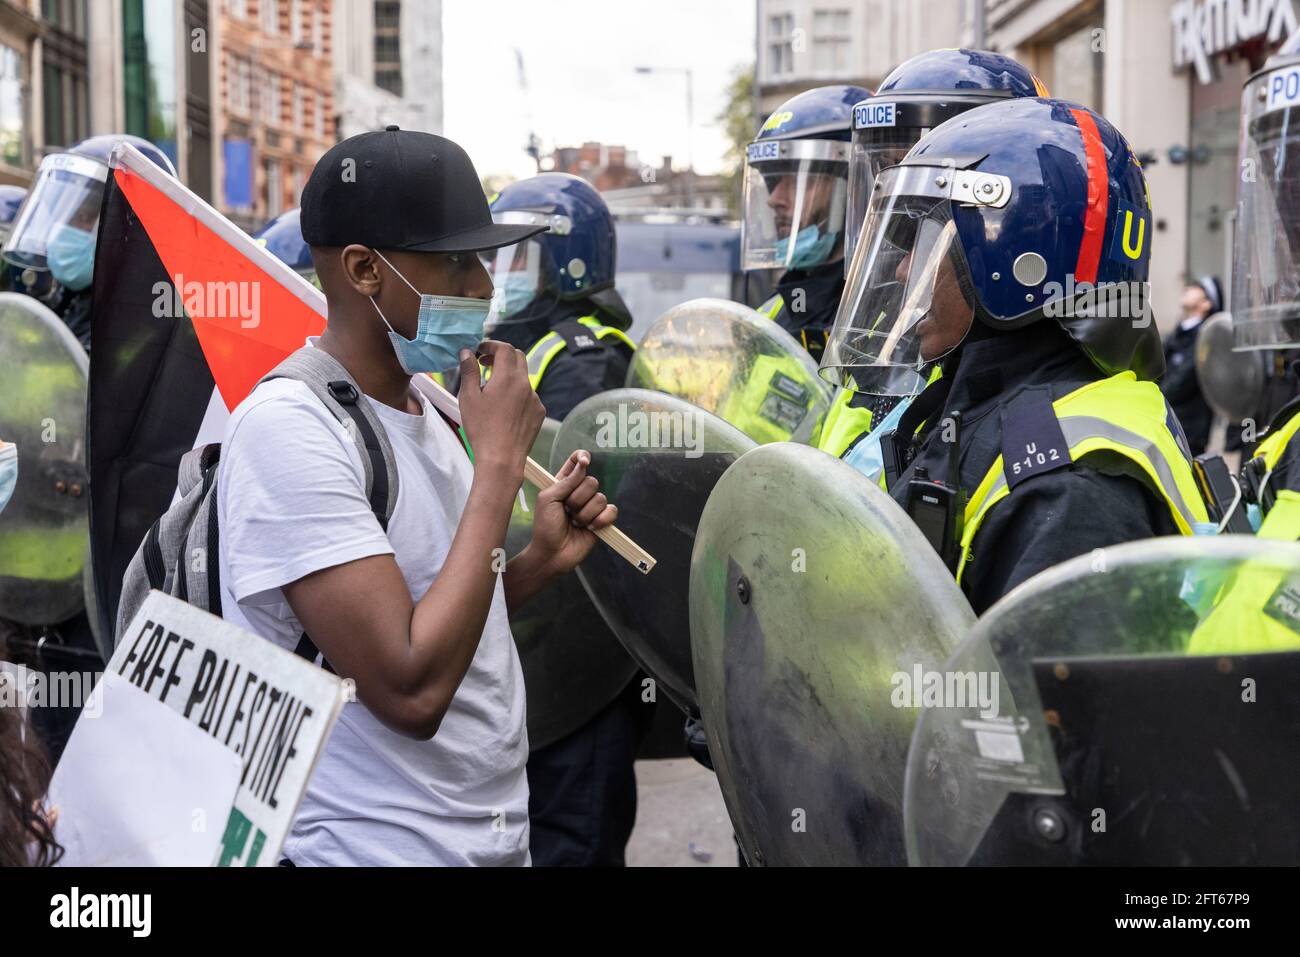 A protester talks with riot police, 'Free Palestine' protest, London, 15 May 2021 Stock Photo